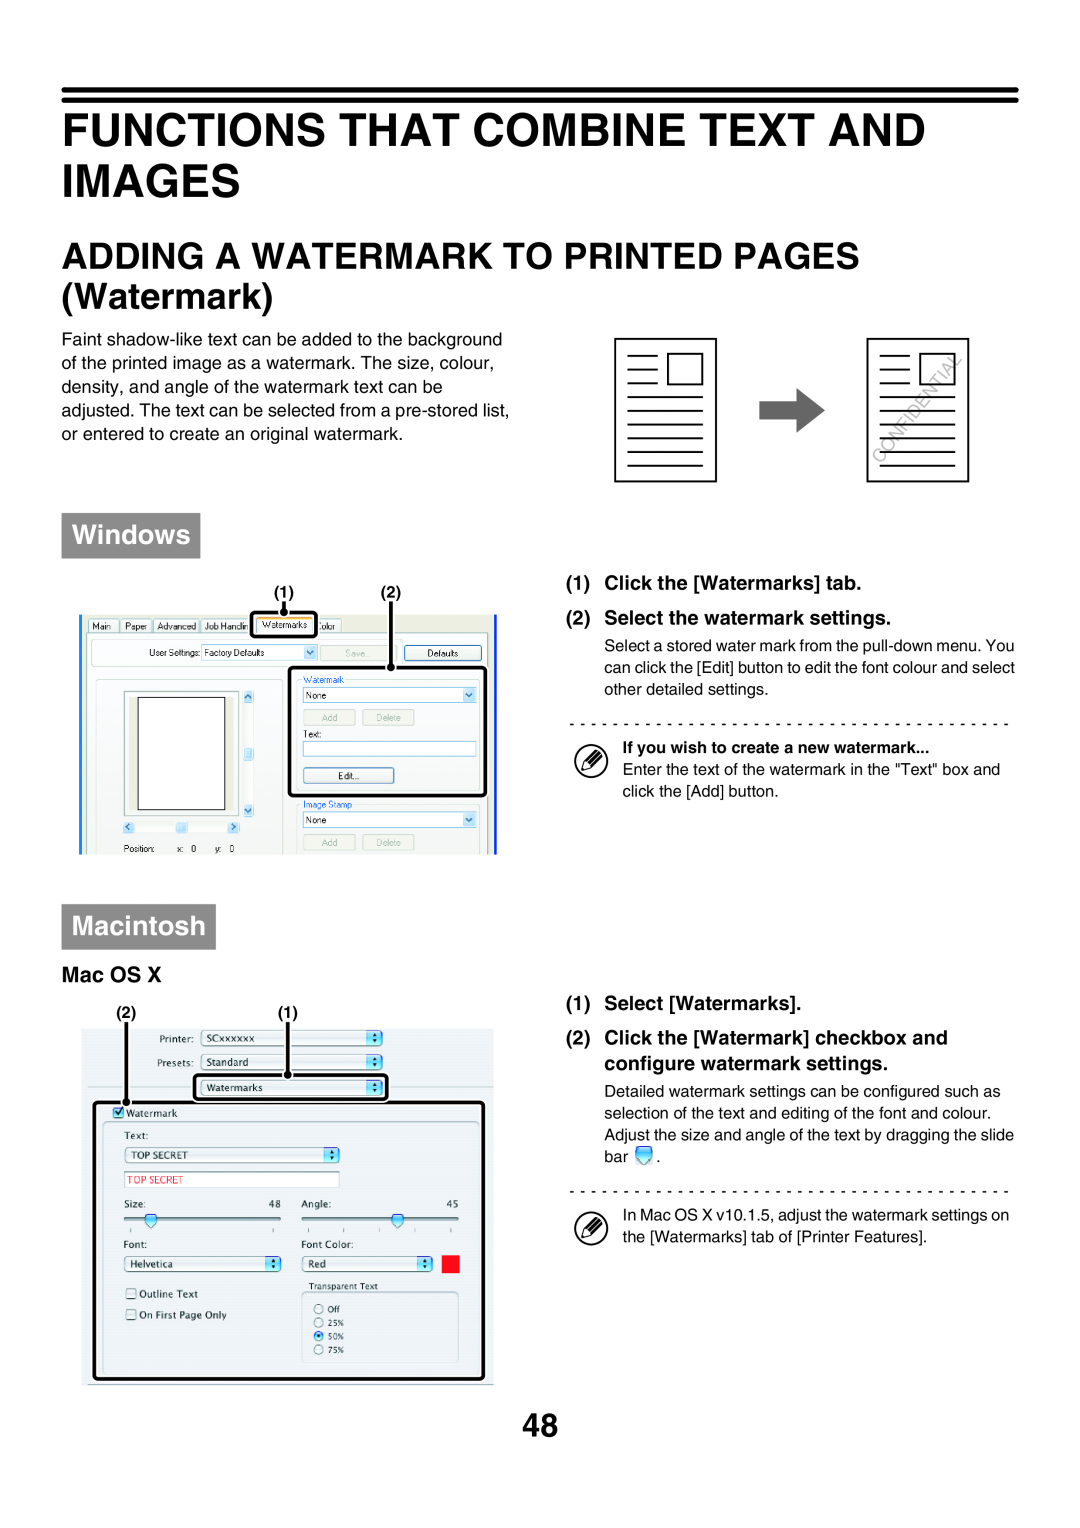 Sharp MX-6200N Functions That Combine Text And Images, ADDING A WATERMARK TO PRINTED PAGES Watermark, Select Watermarks 